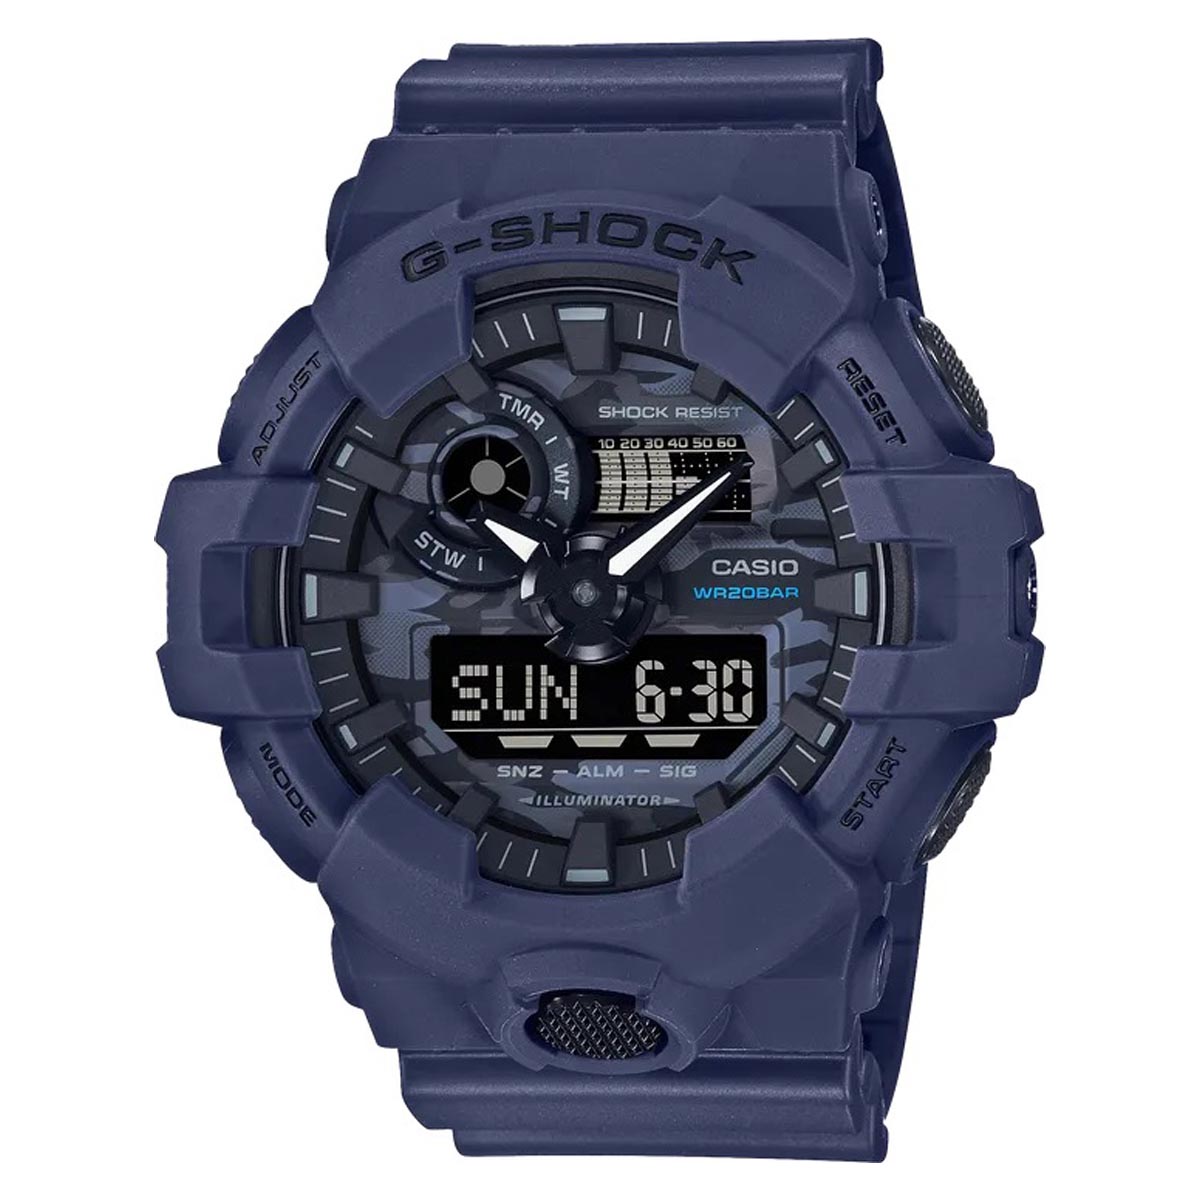 G Shock Mens Watch with Grey Dial and Blue Resin Strap (quartz movement)